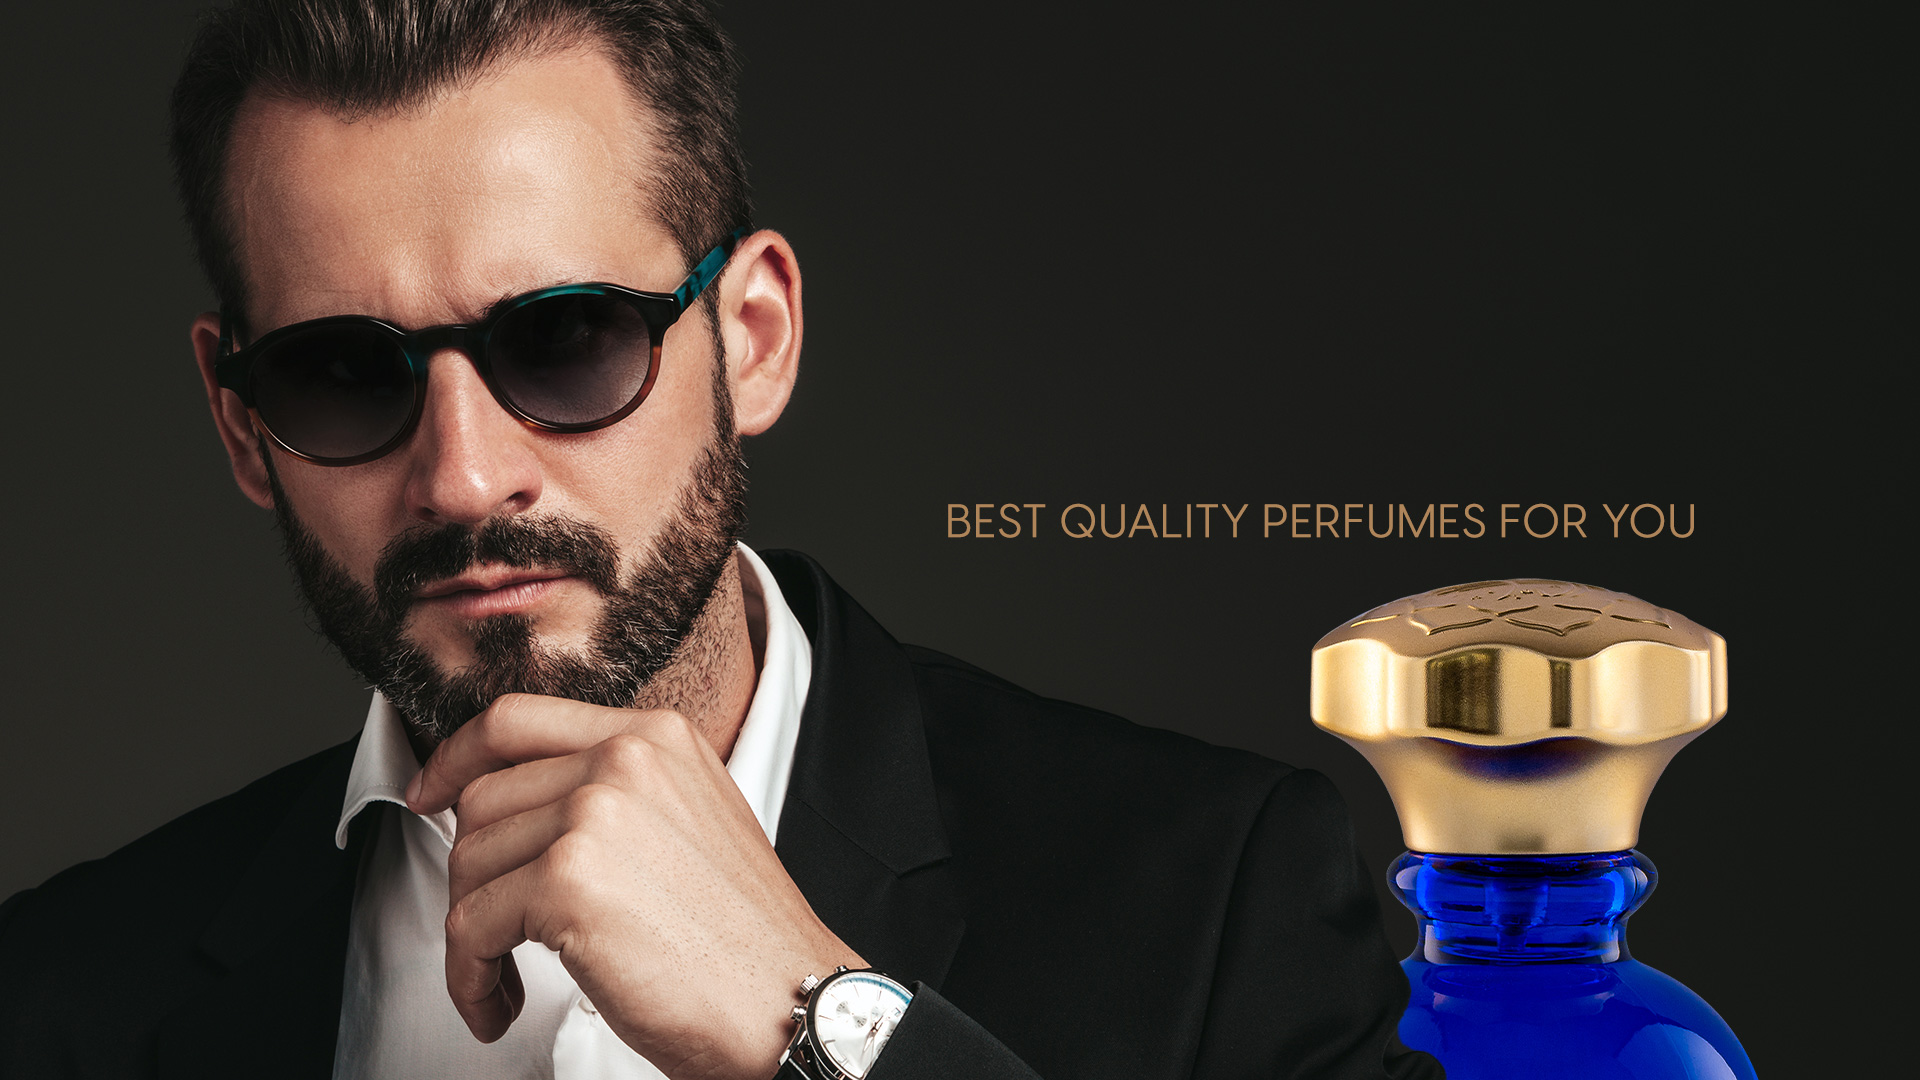 Add a Touch of Luxury to Your Wedding Day: Best Quality Perfumes for Him